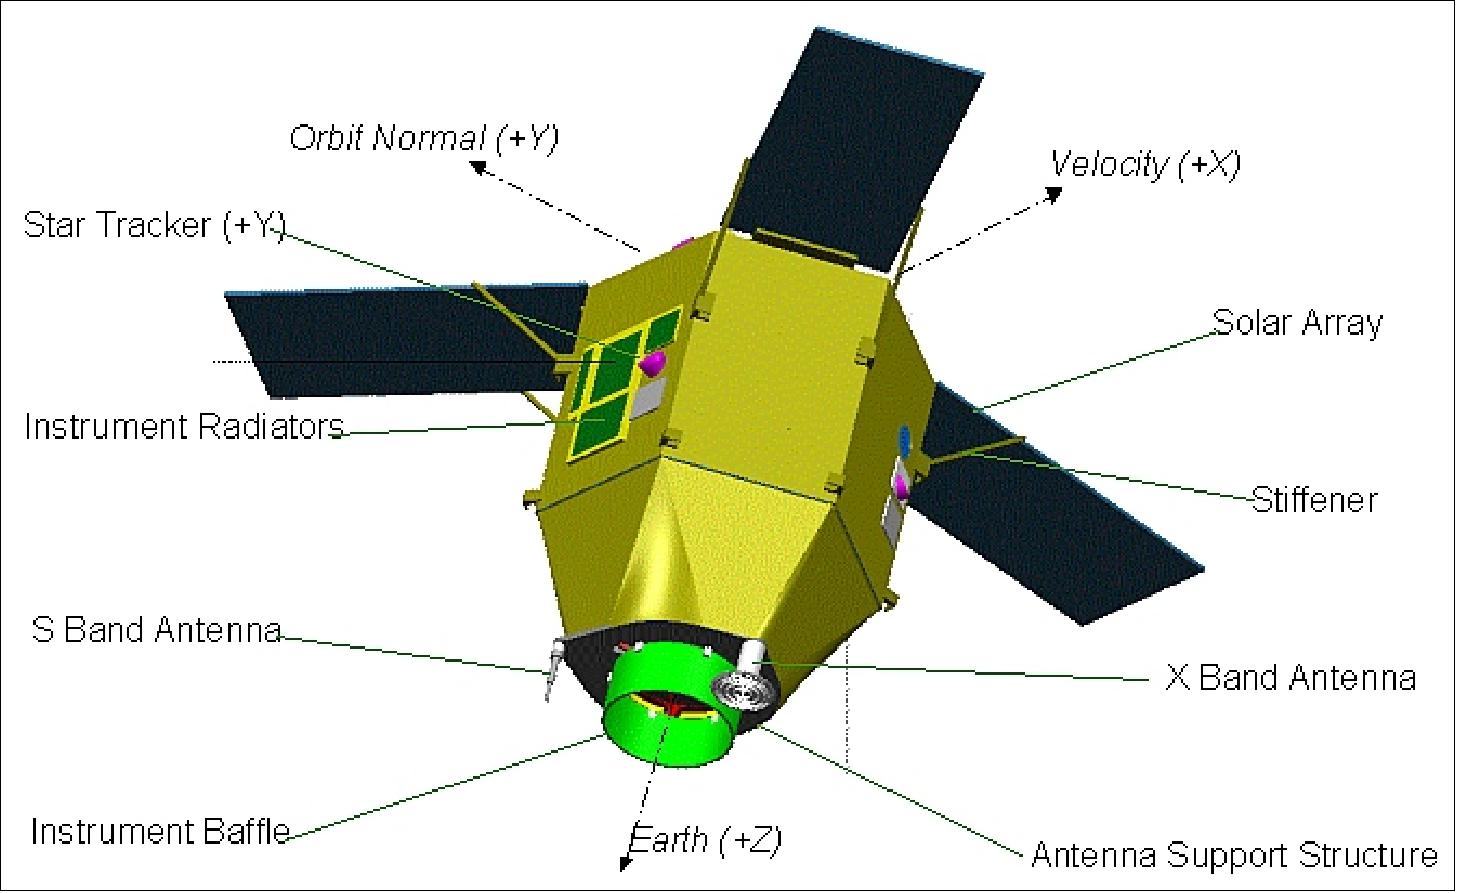 Figure 3: Schematic layout of the Pleiades outer structure (image credit: CNES)